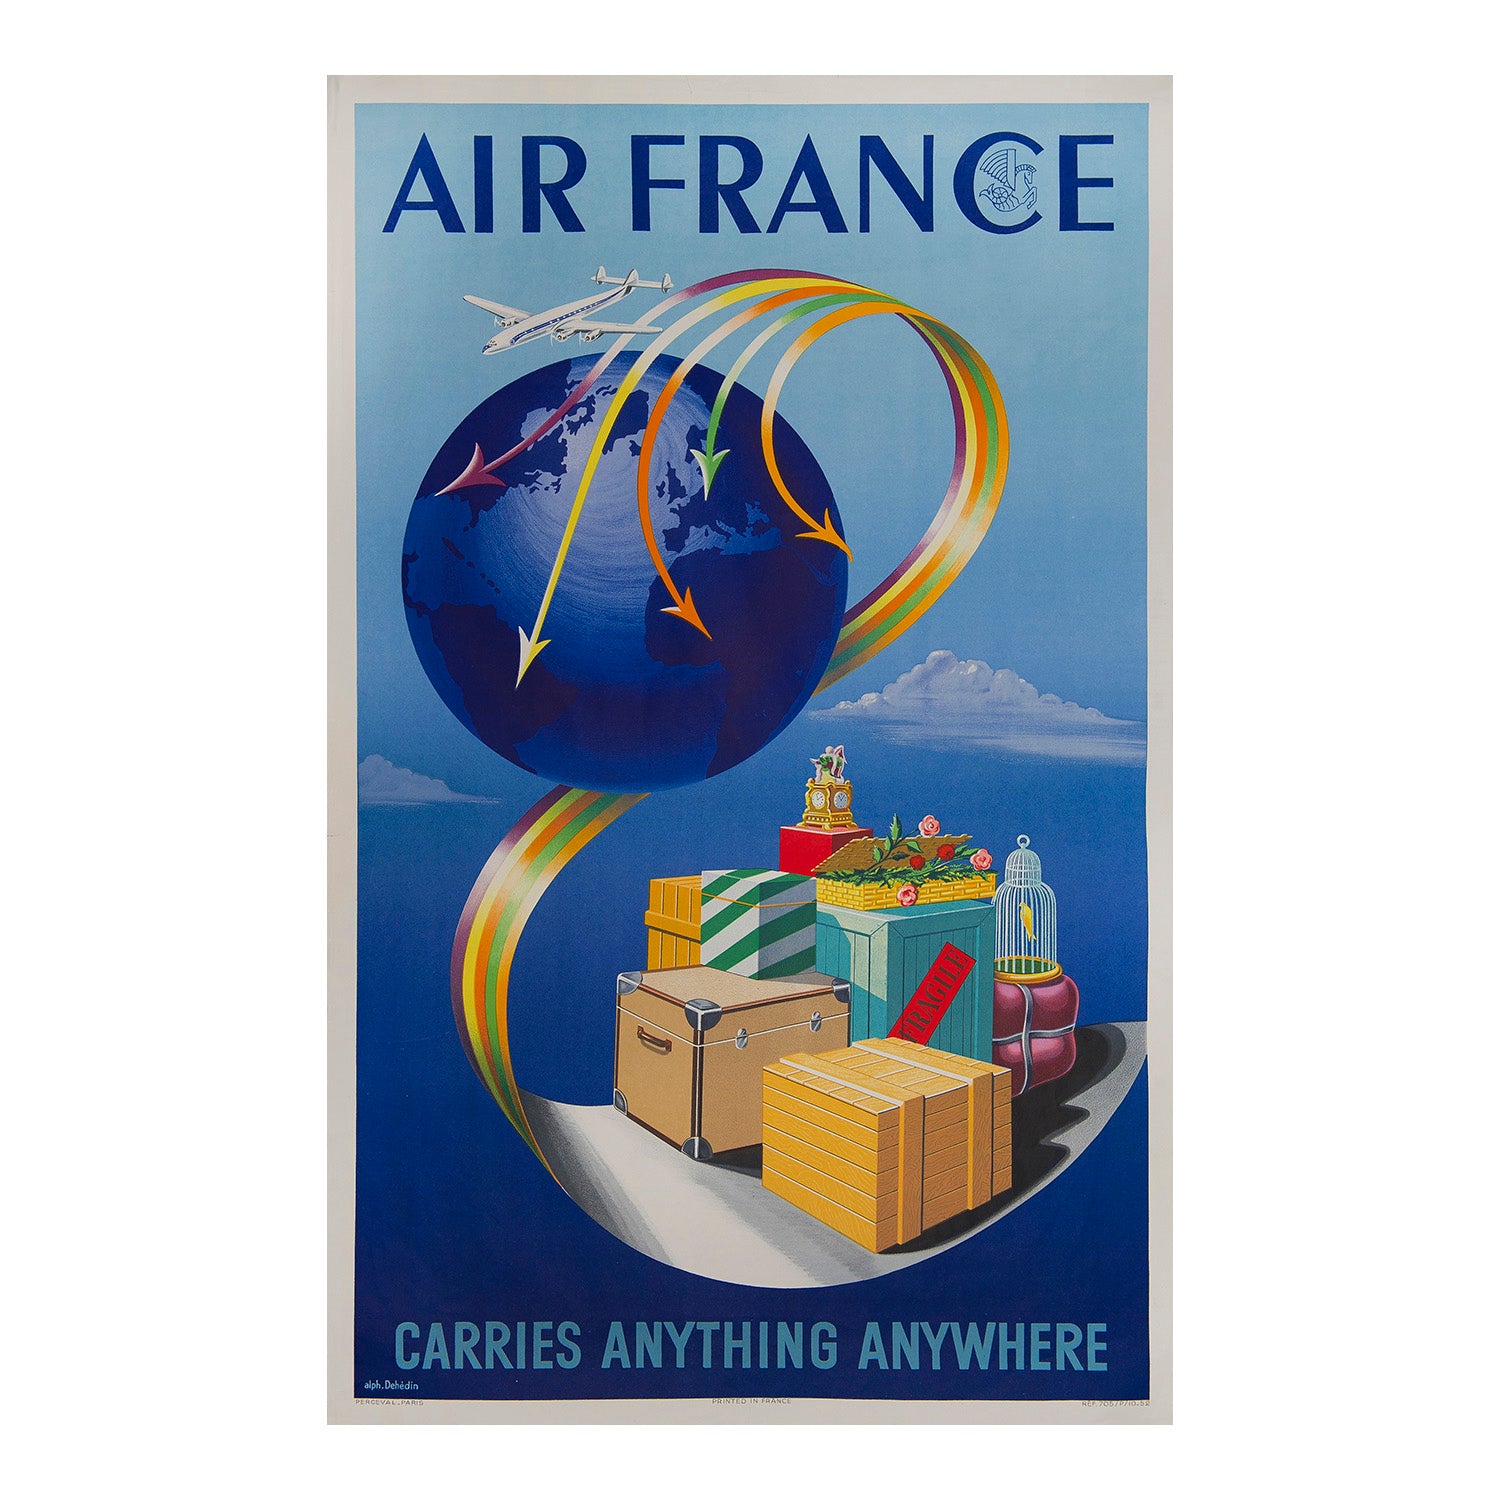 Original Air France poster by Alphonse Dehédin, 1952, featuring a Lockheed Super Constellation traversing the globe above the slogan Carries Everything Everywhere